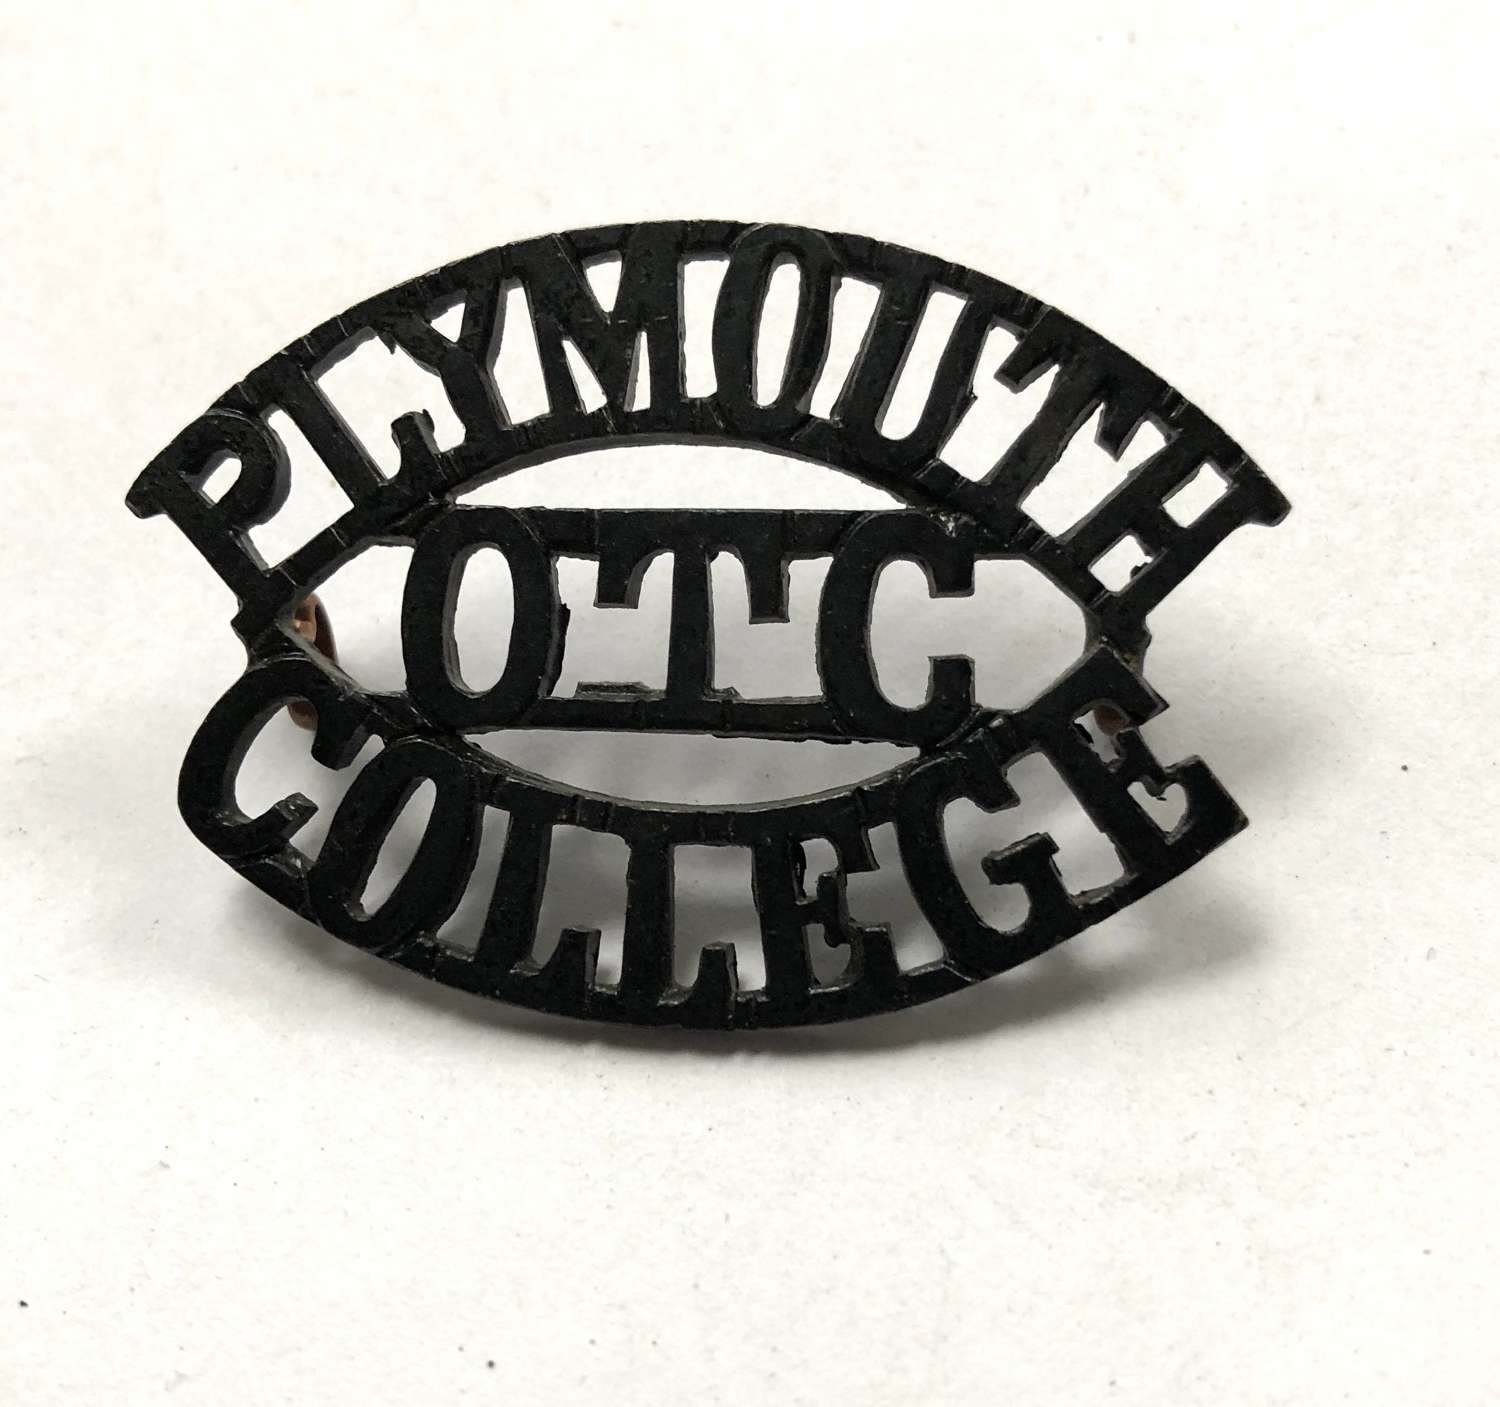 PLYMOUTH / OTC / COLLEGE shoulder title c1908-40